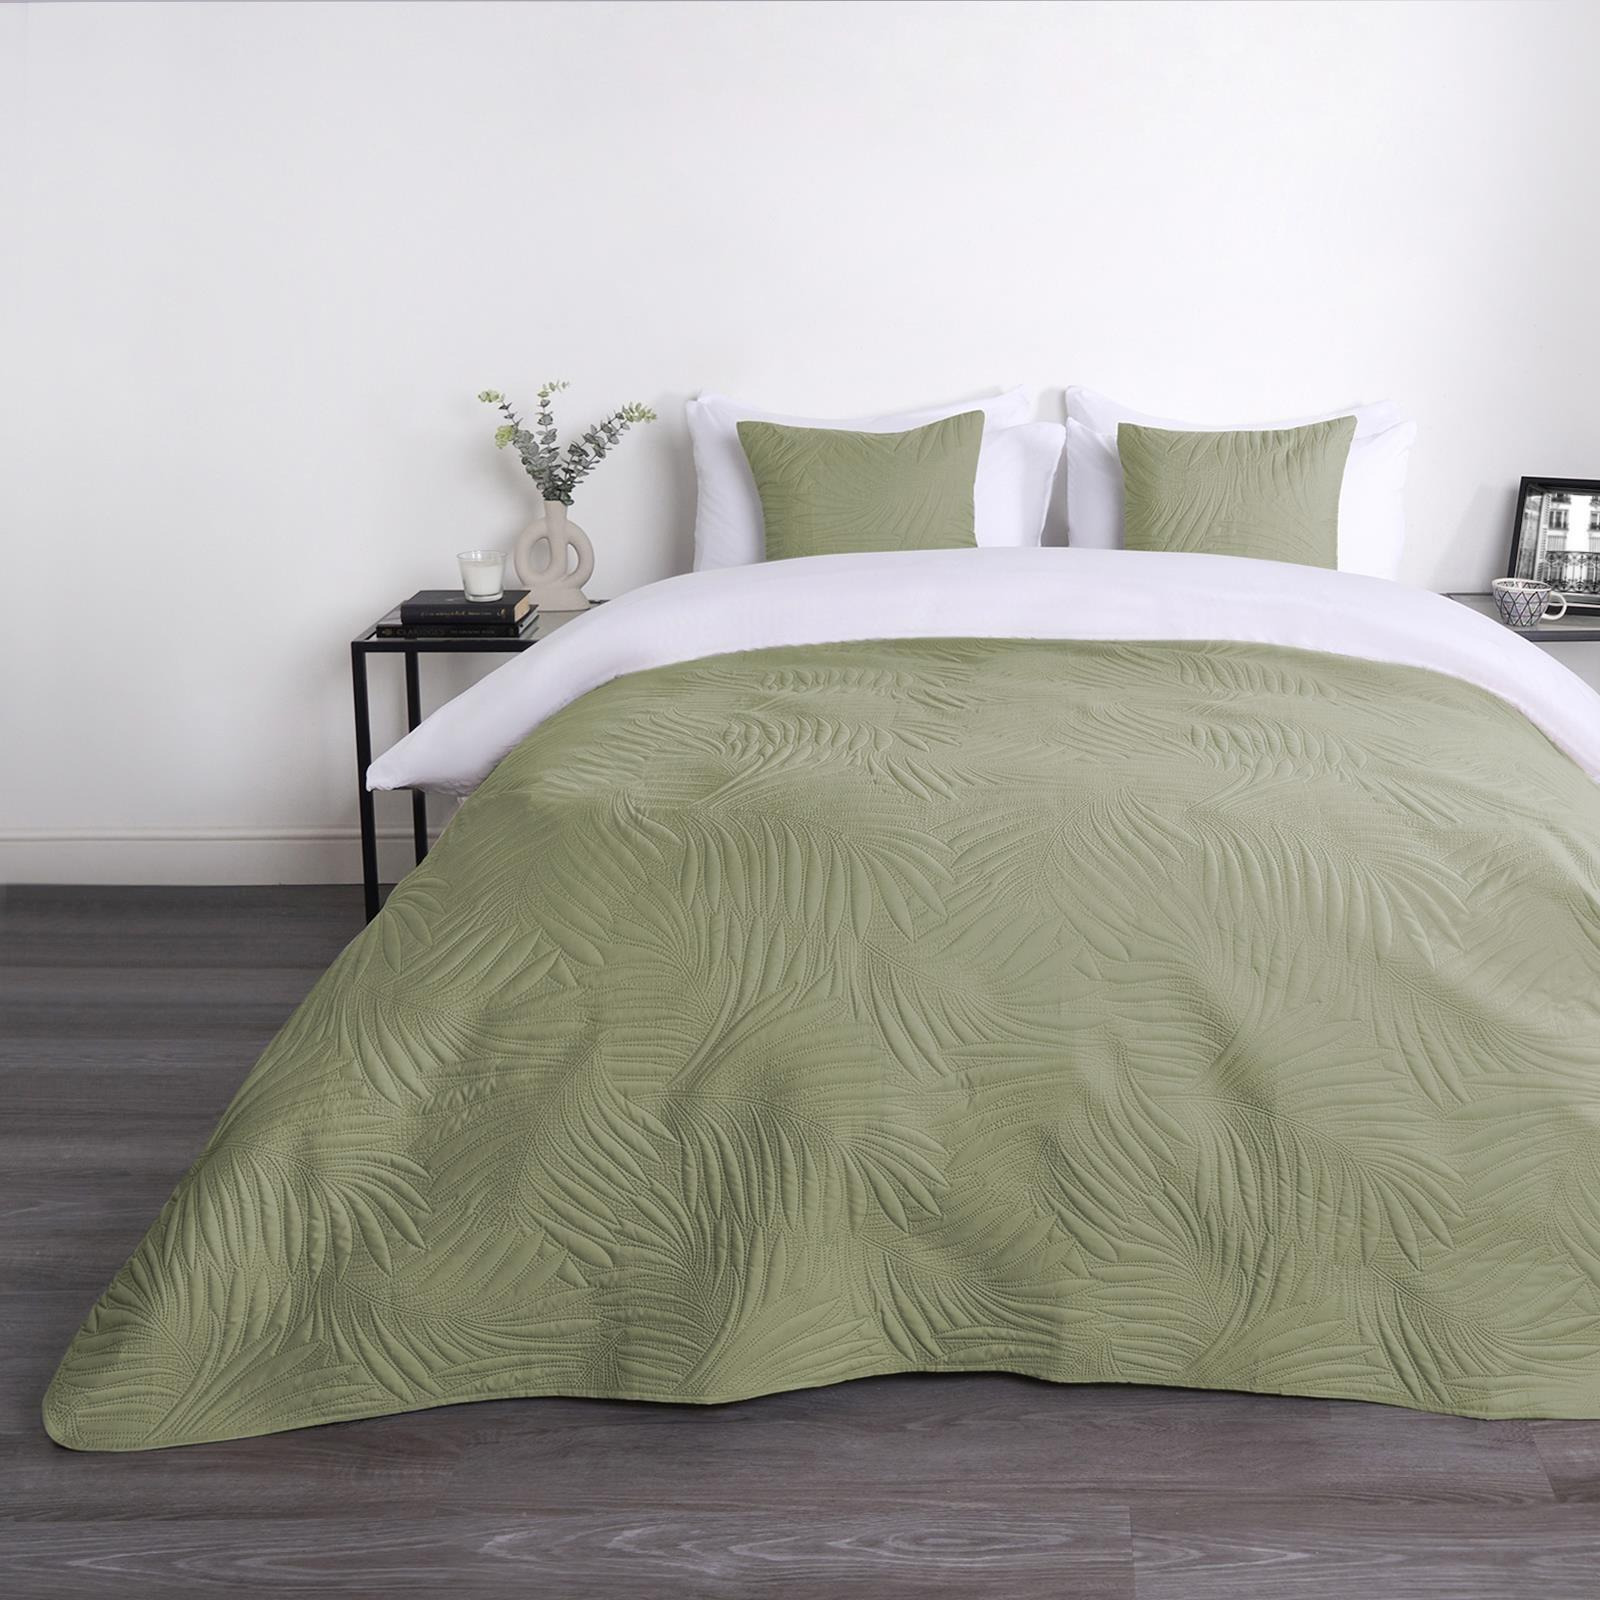 Leaf Pinsonic Throw Over Bed Blanket Quilted Bedspread - image 1